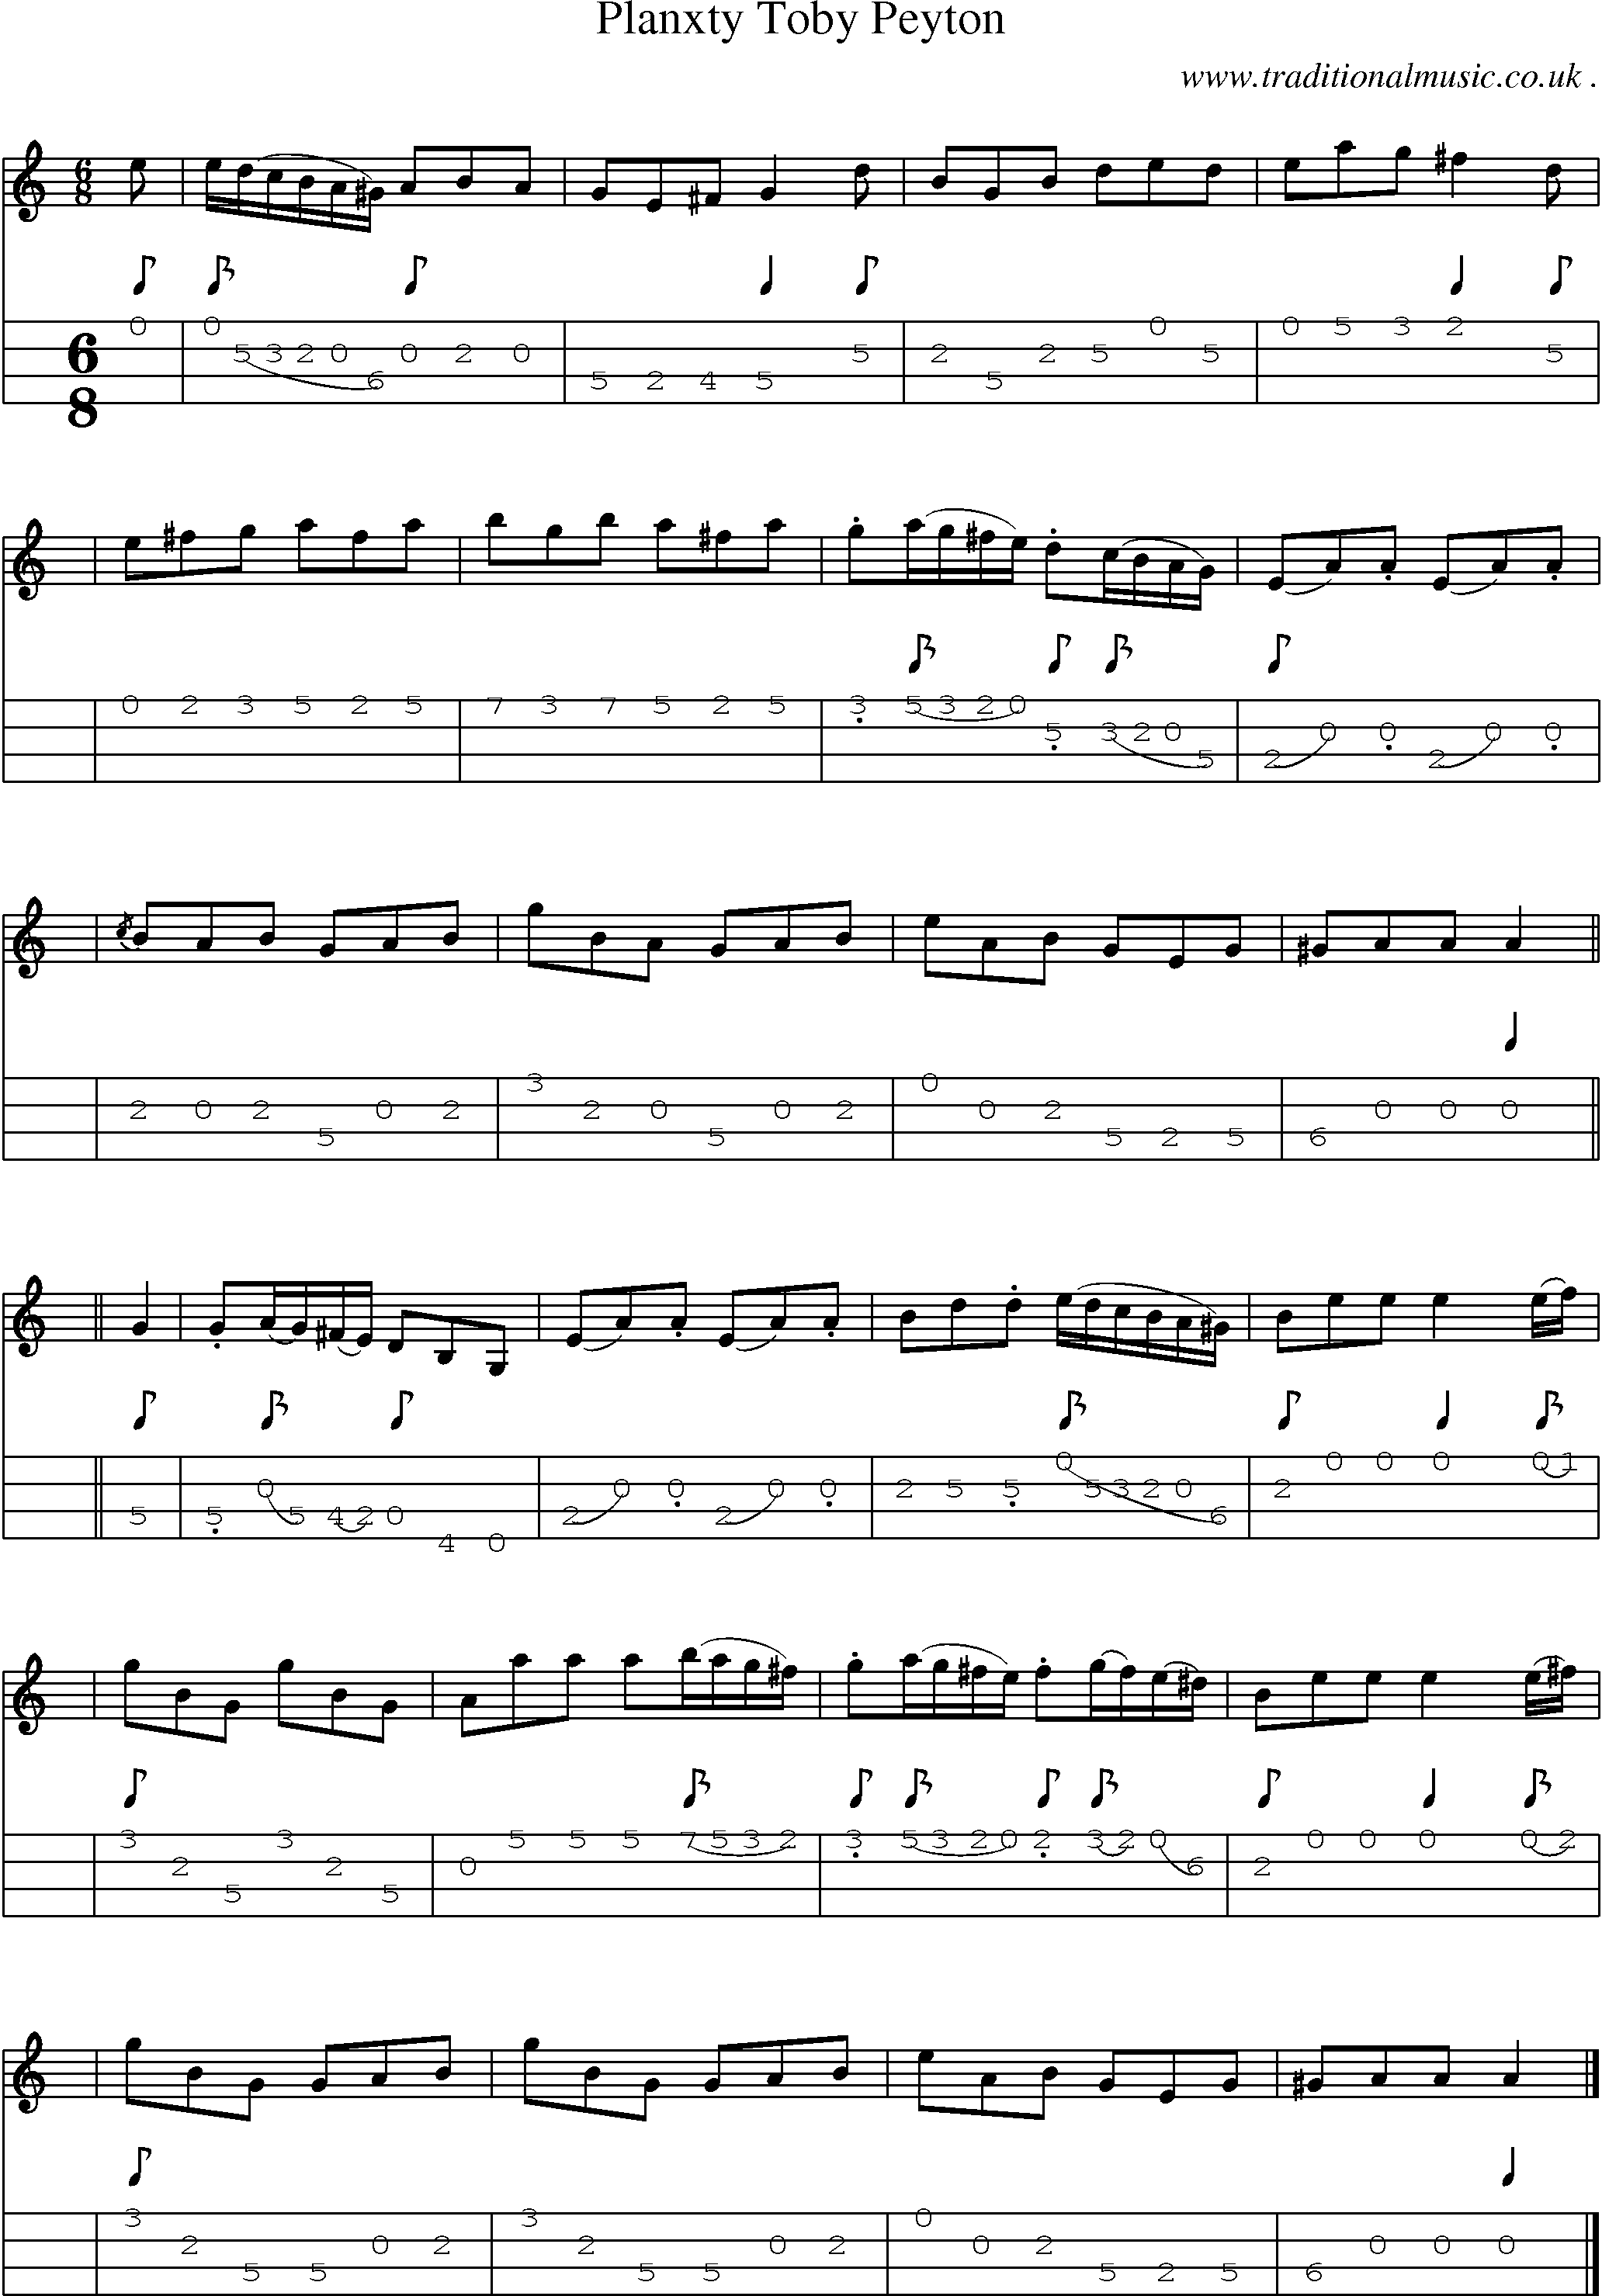 Sheet-music  score, Chords and Mandolin Tabs for Planxty Toby Peyton